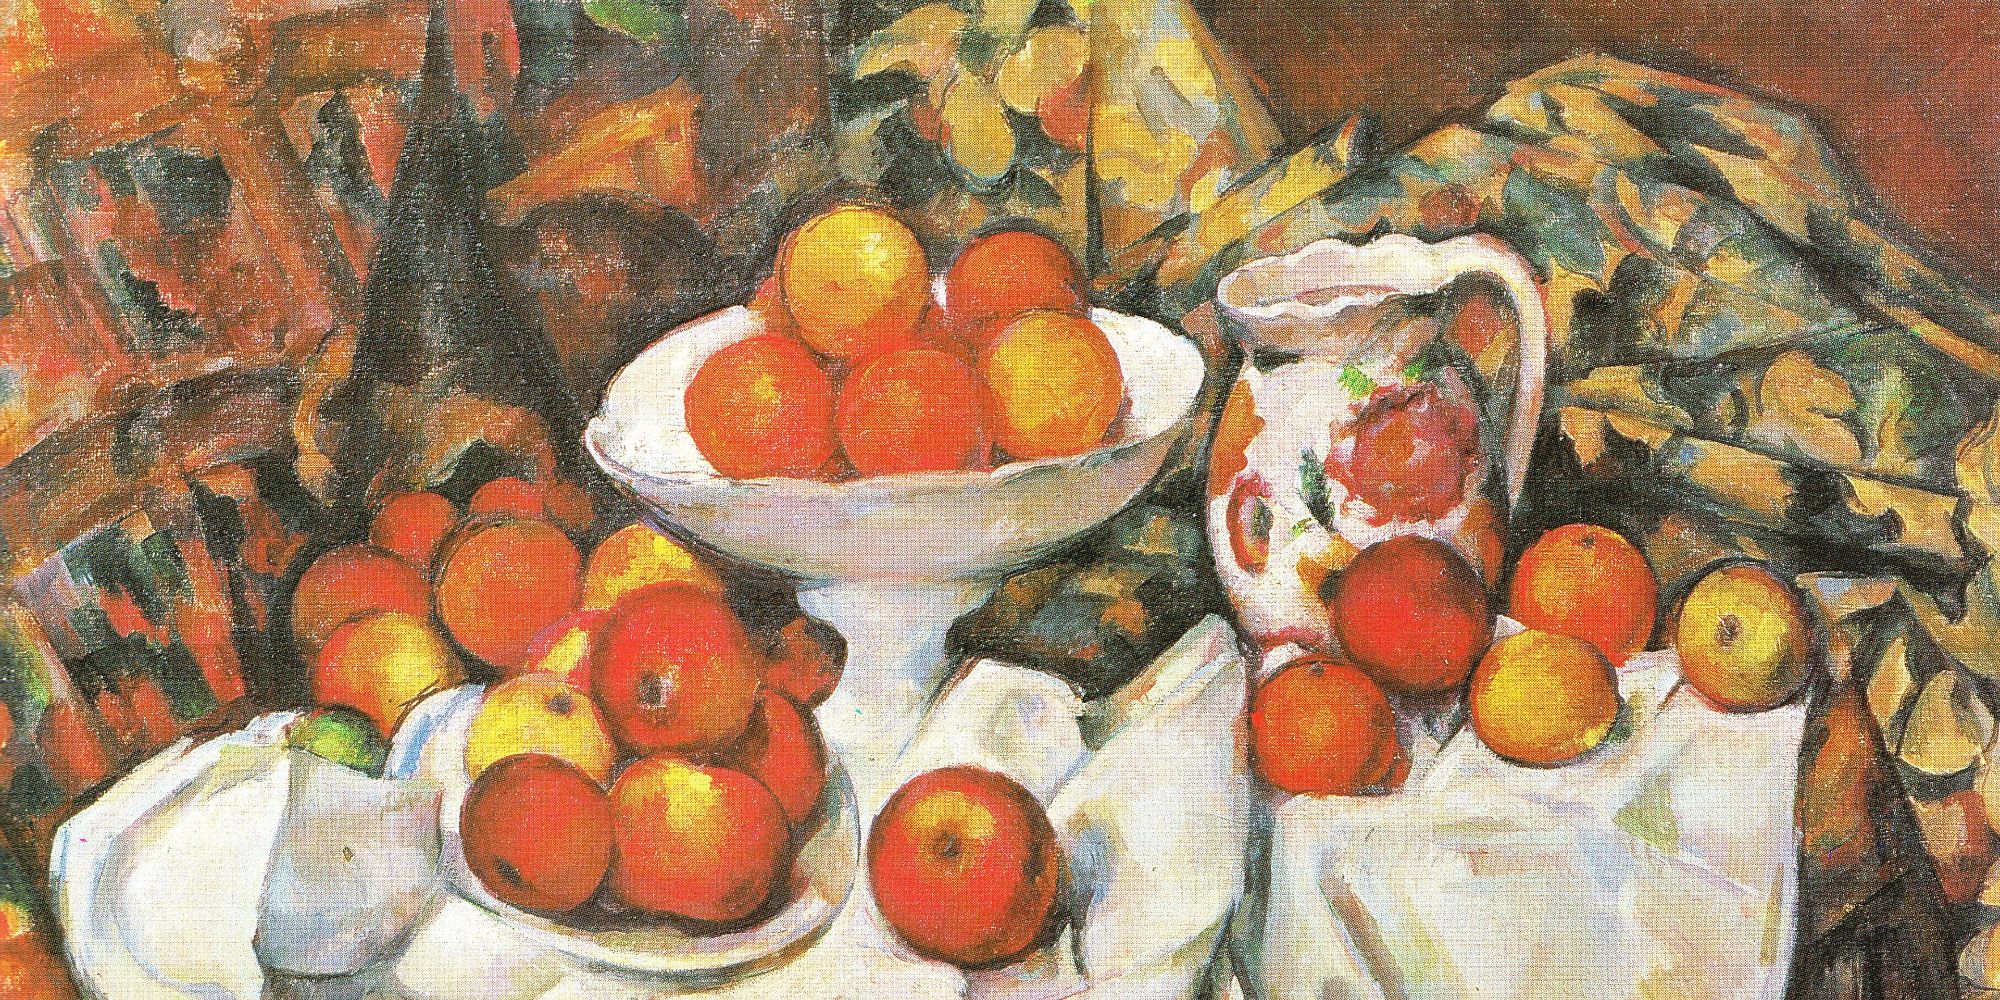 Paul Cézanne's Still Life with Apples and Oranges